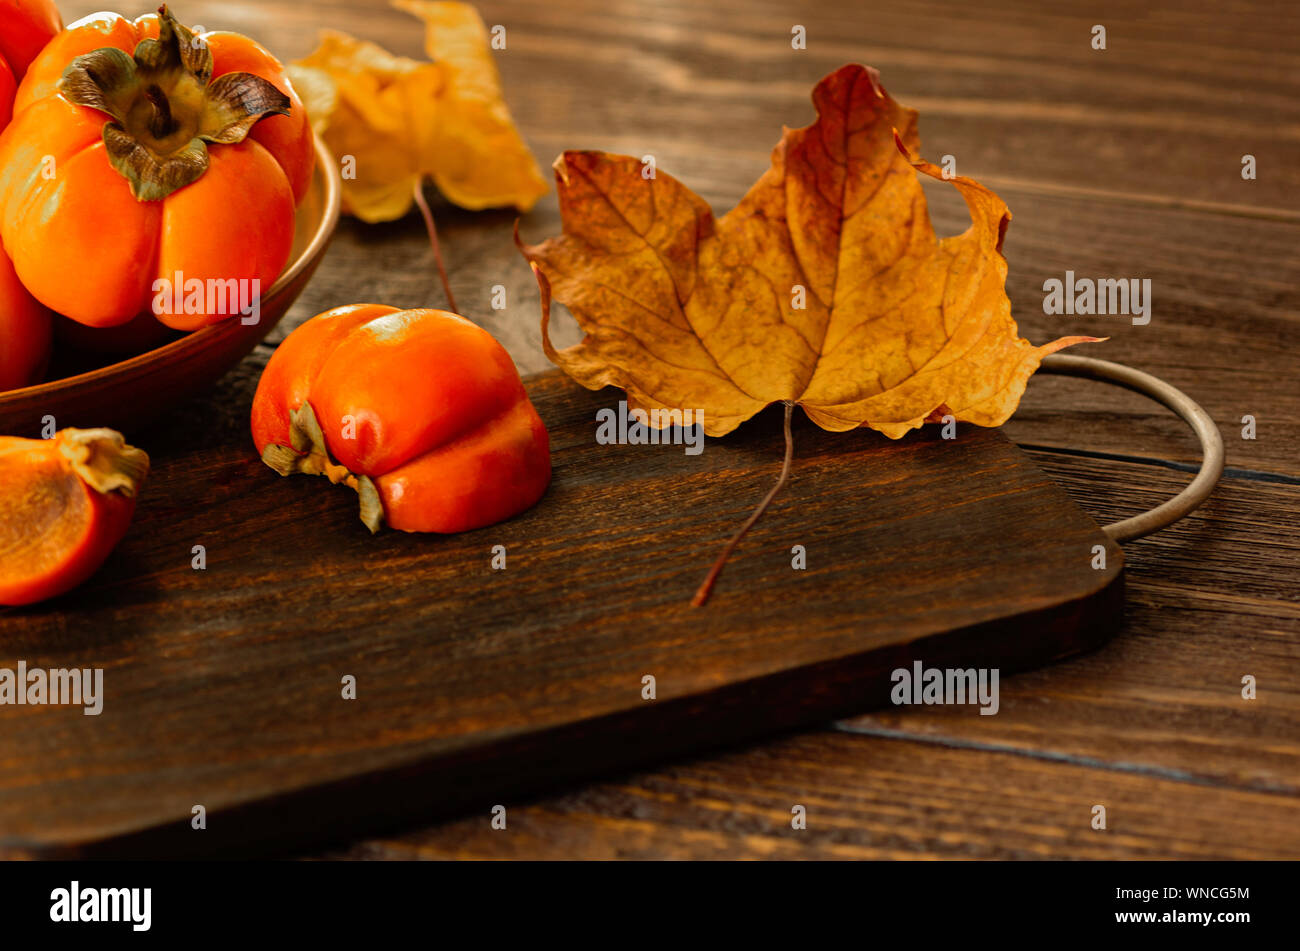 Ripe persimmons on a wooden background. Persimmon variety Fuyu. Close-up. Stock Photo